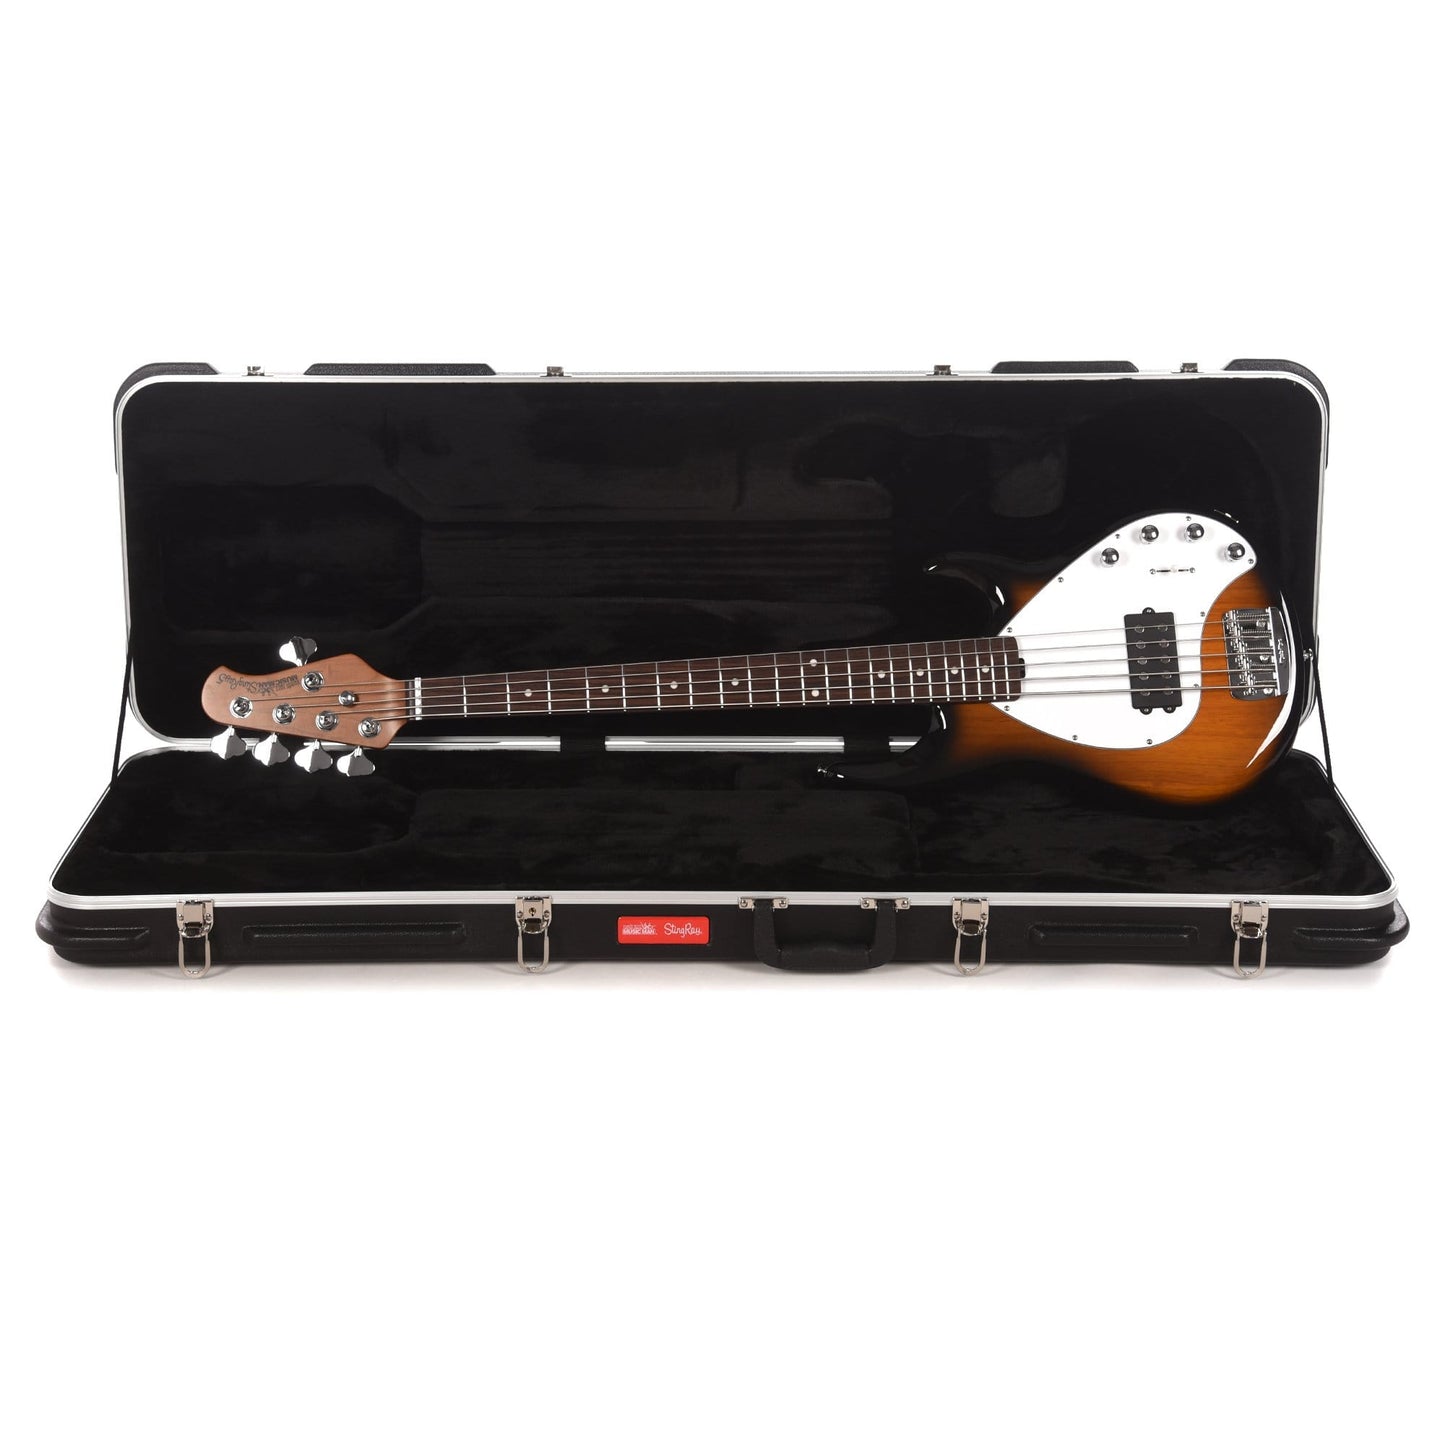 Music Man StingRay5 Special 5-String Vintage Tobacco w/White Pickguard Bass Guitars / 5-String or More